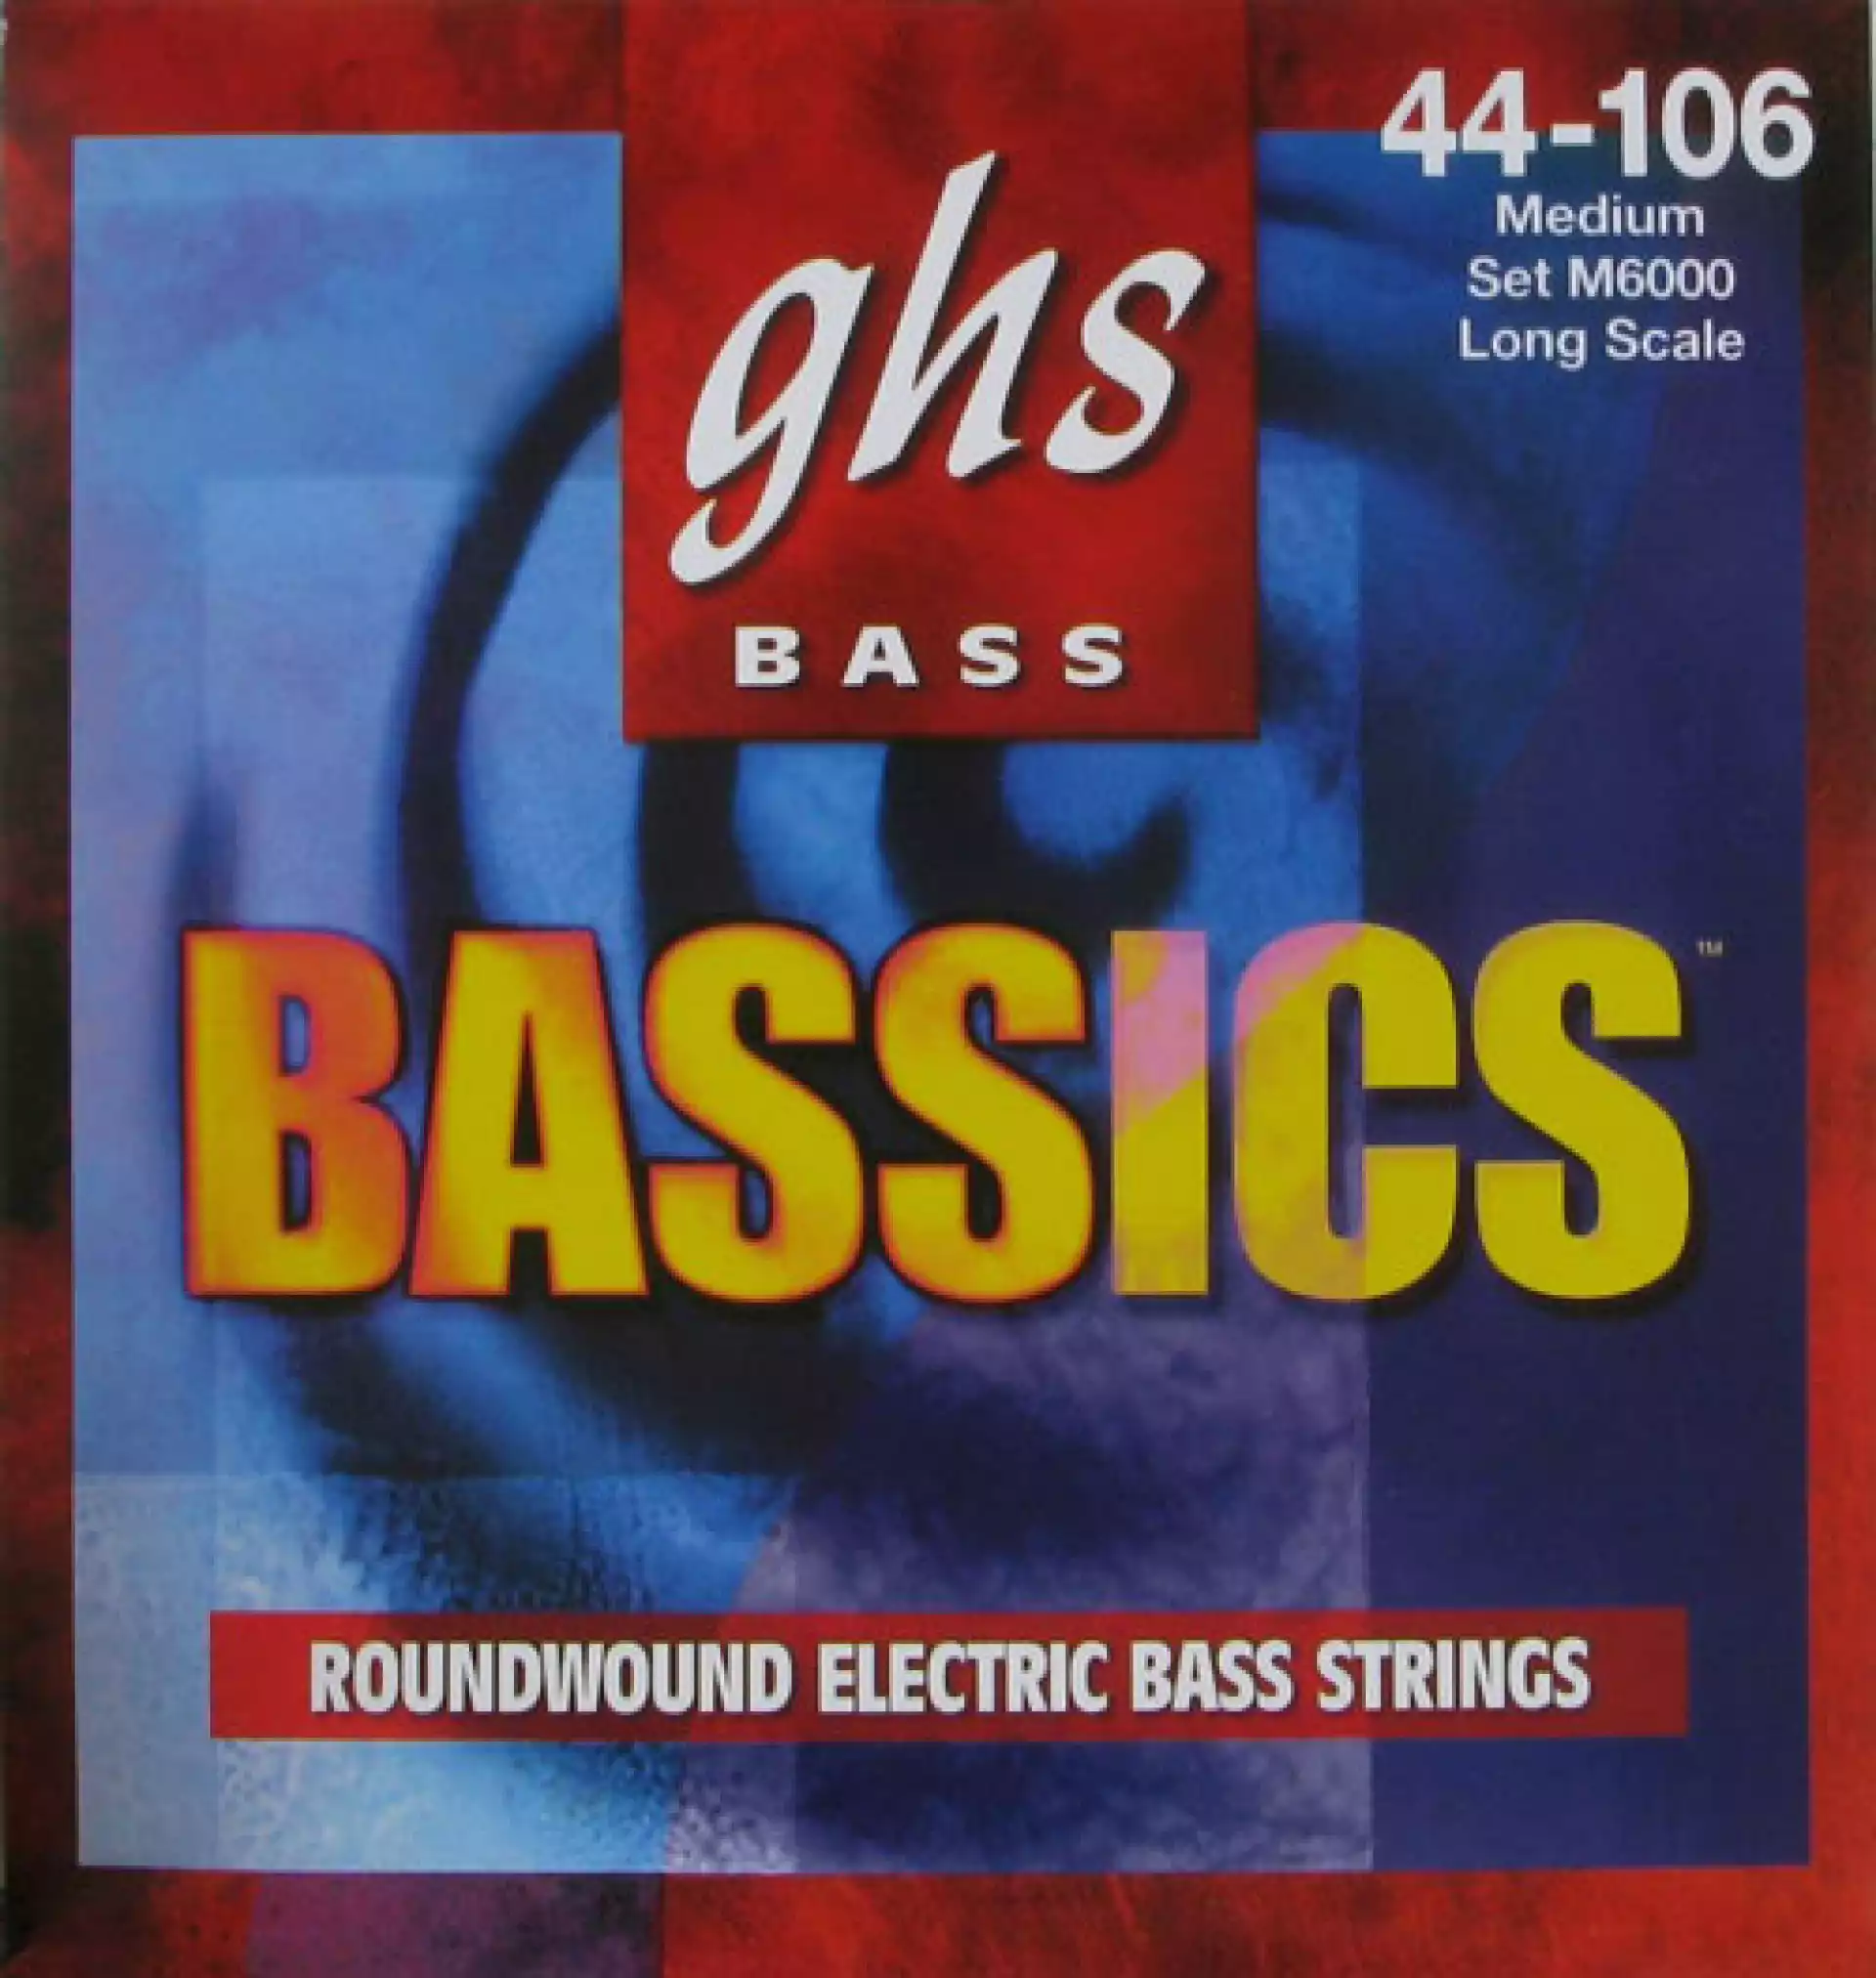 GHS M6000 Bassics Nickel Plated Steel Round Wound Electric Bass Strings Long Scale - 4-String 44-106